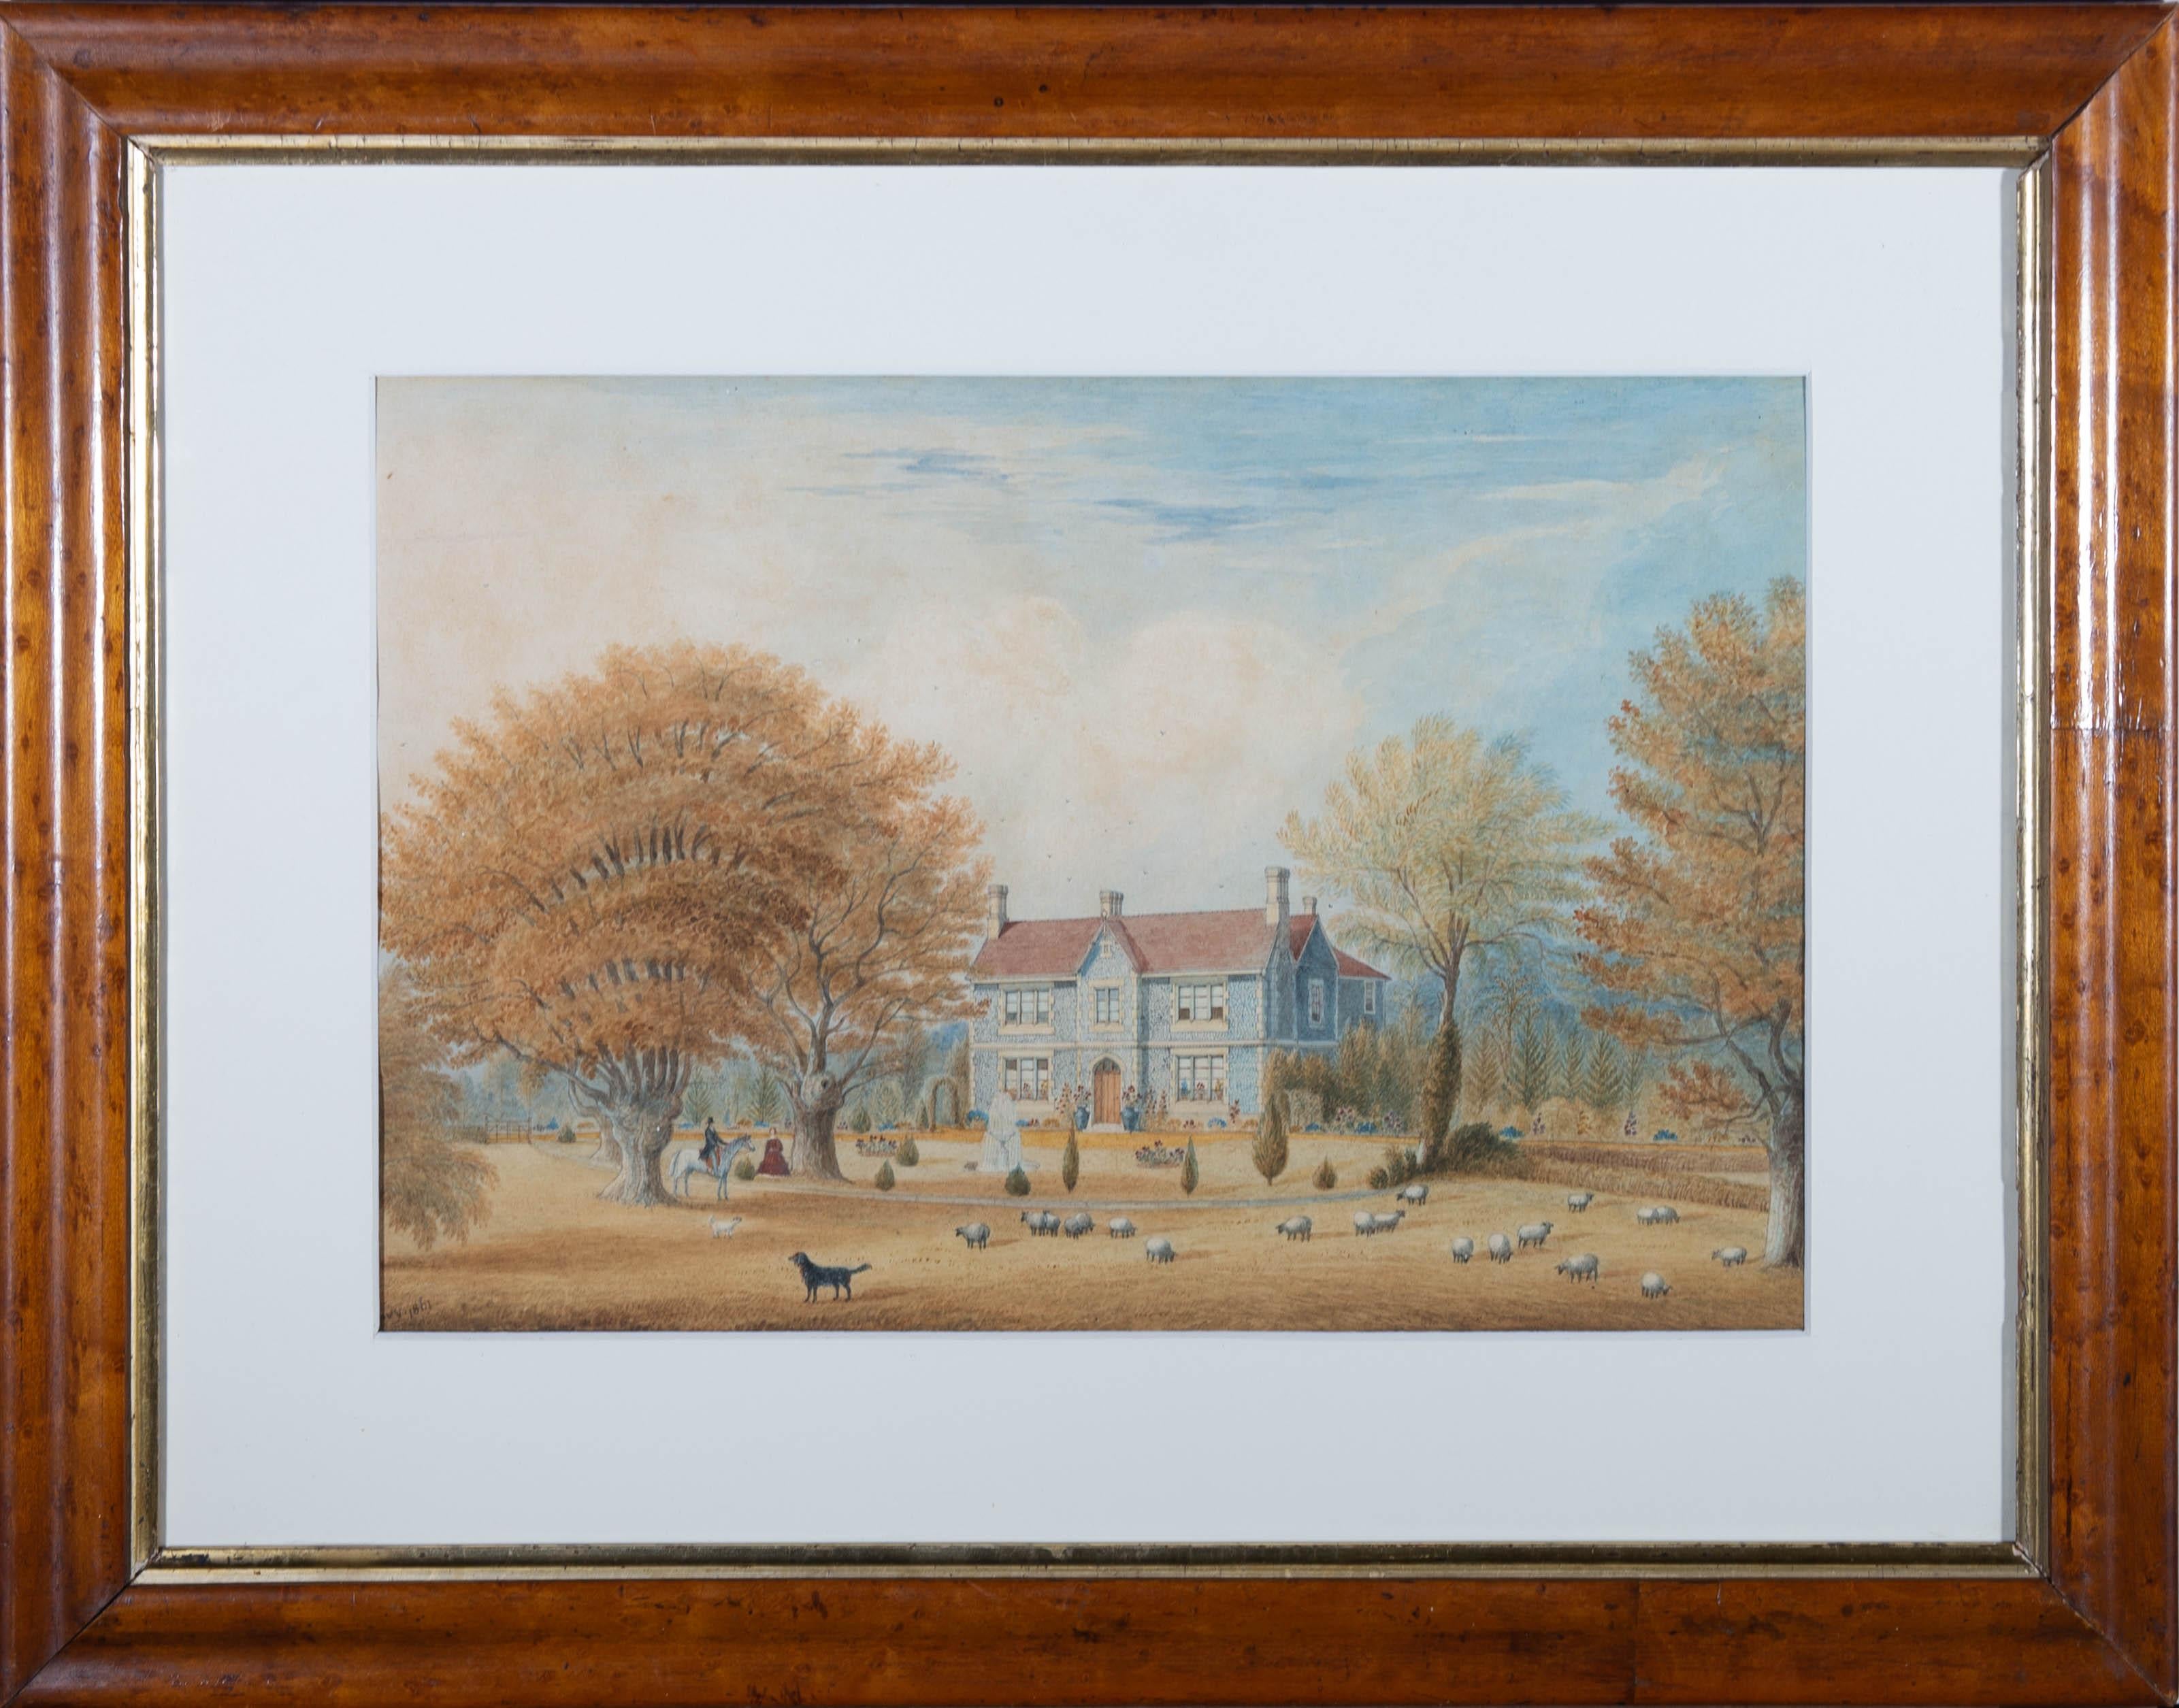 This charming watercolour scene depicts a man on horseback looking over the grounds of a country house. The grand manor house is at the centre of the composition, surrounded by blooming summer flowers. In the foreground a herd of sheep graze on the